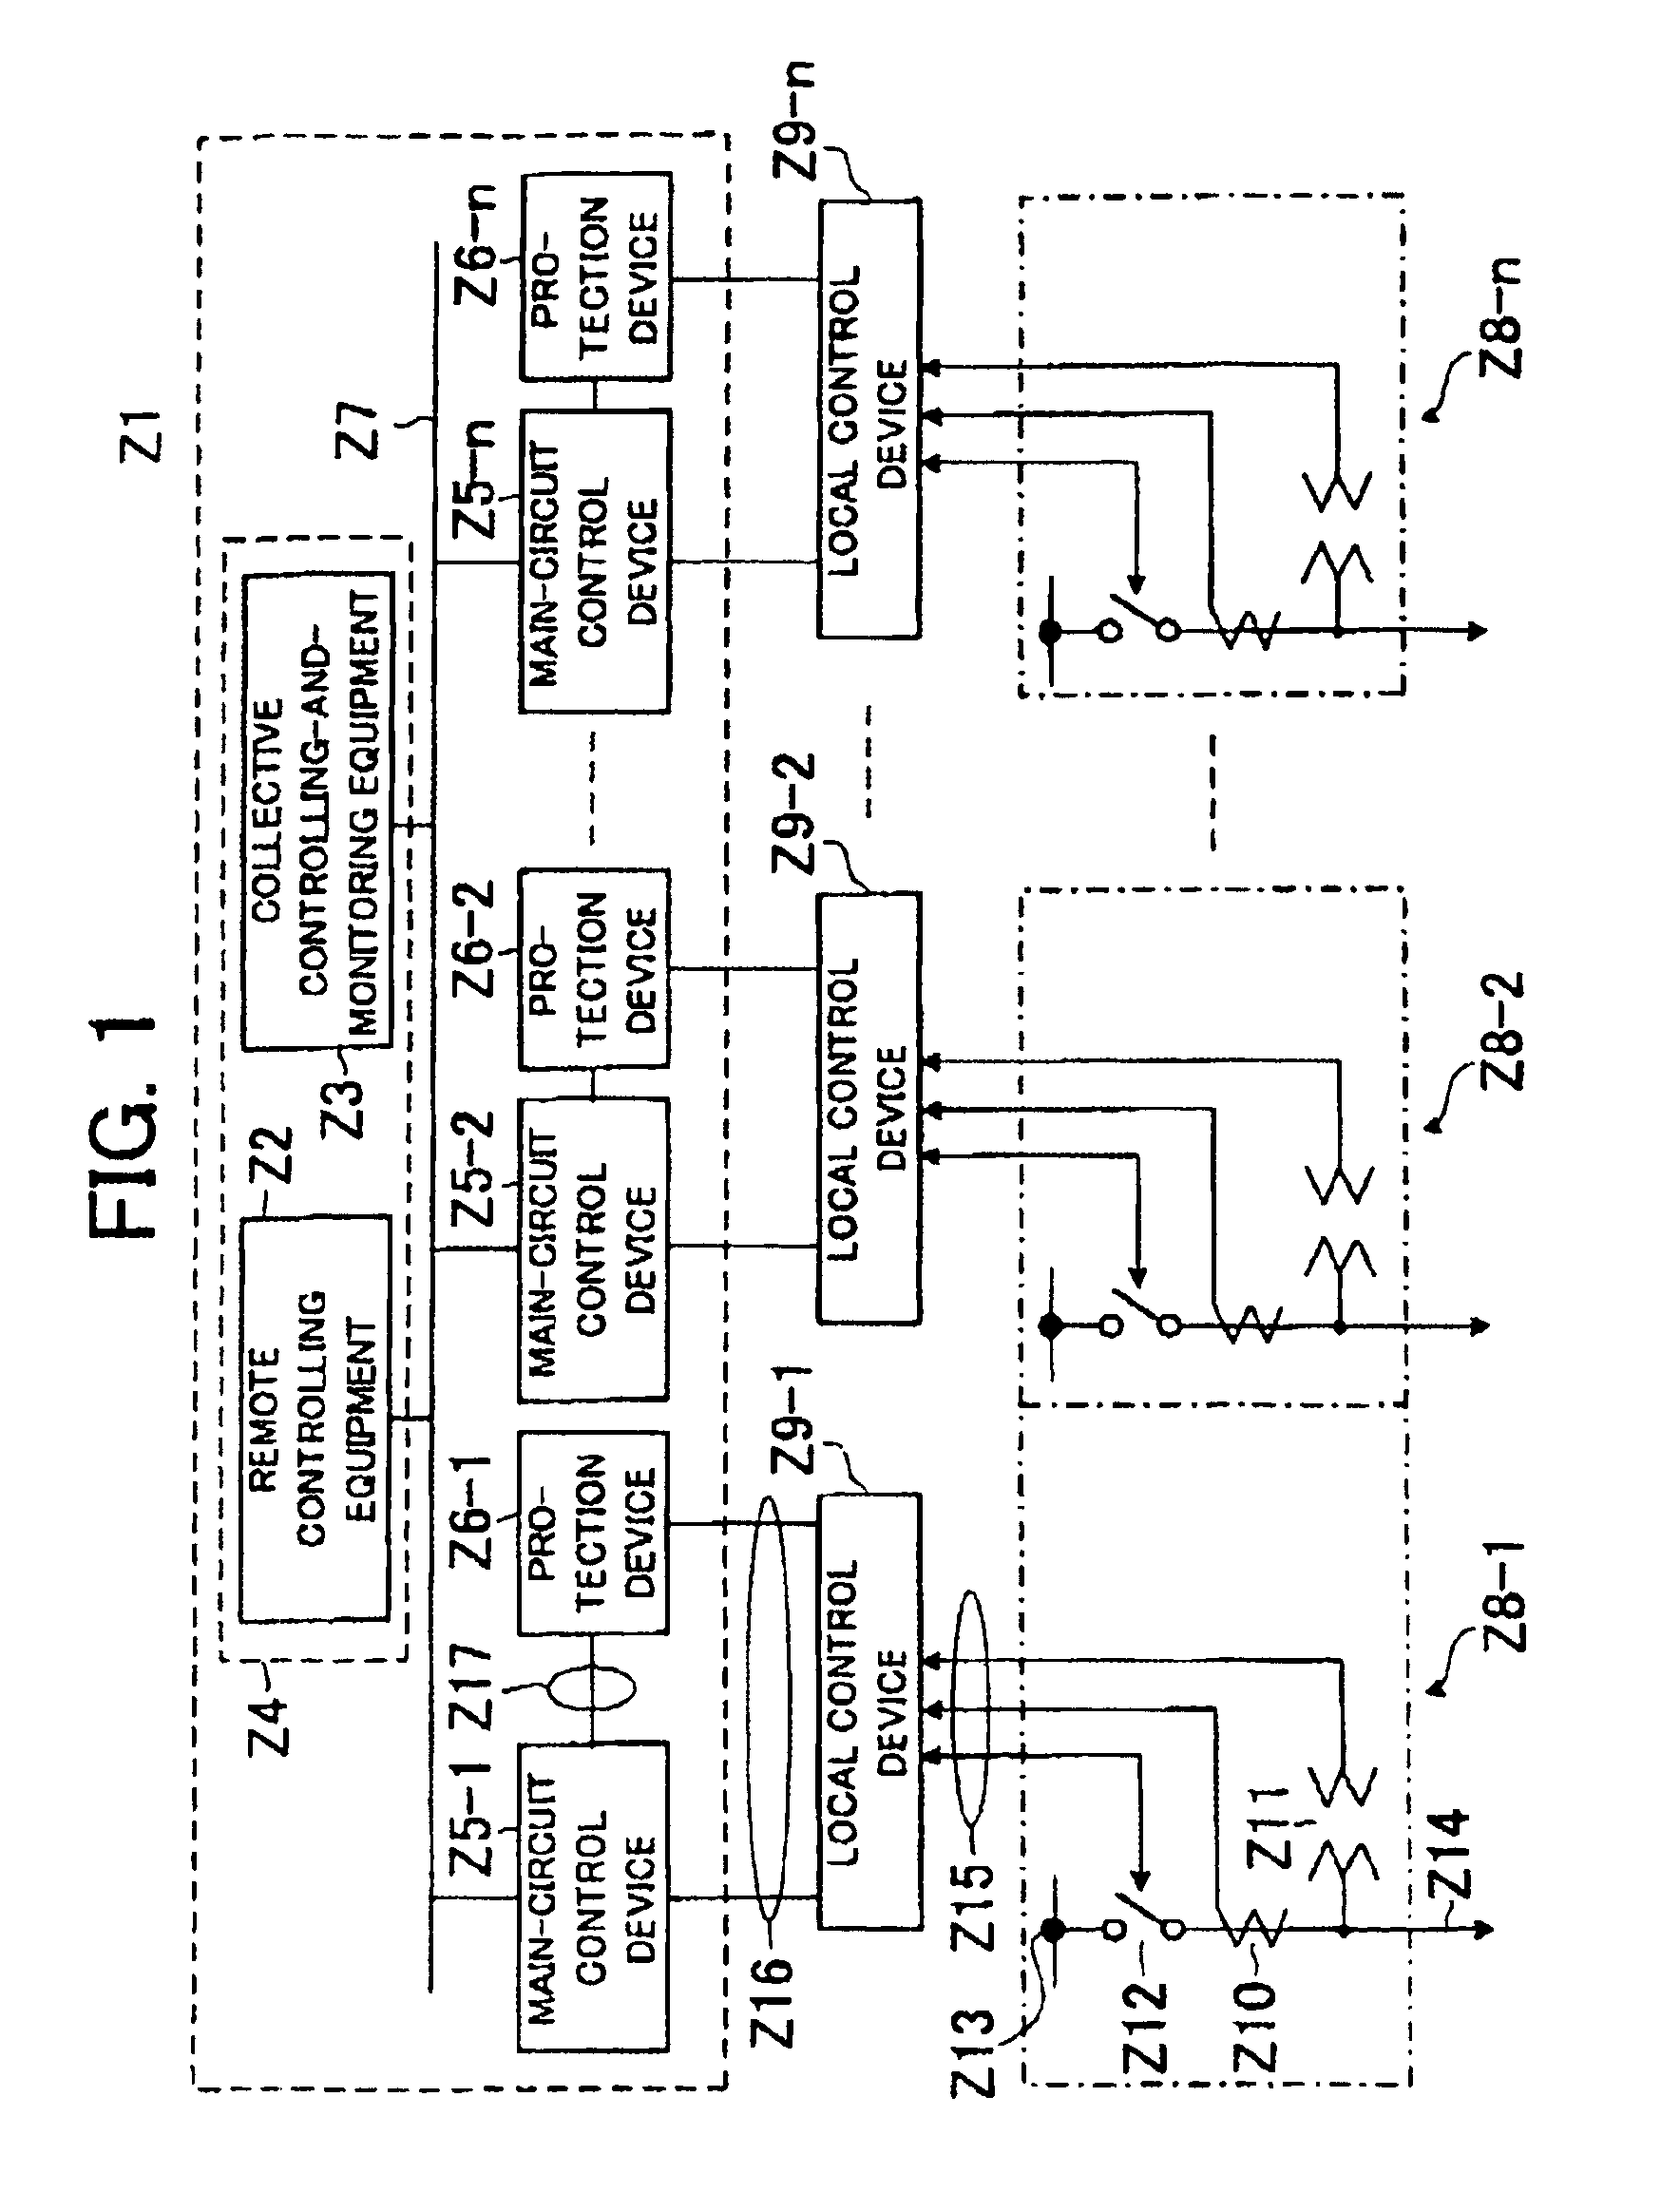 Digital protection and control device